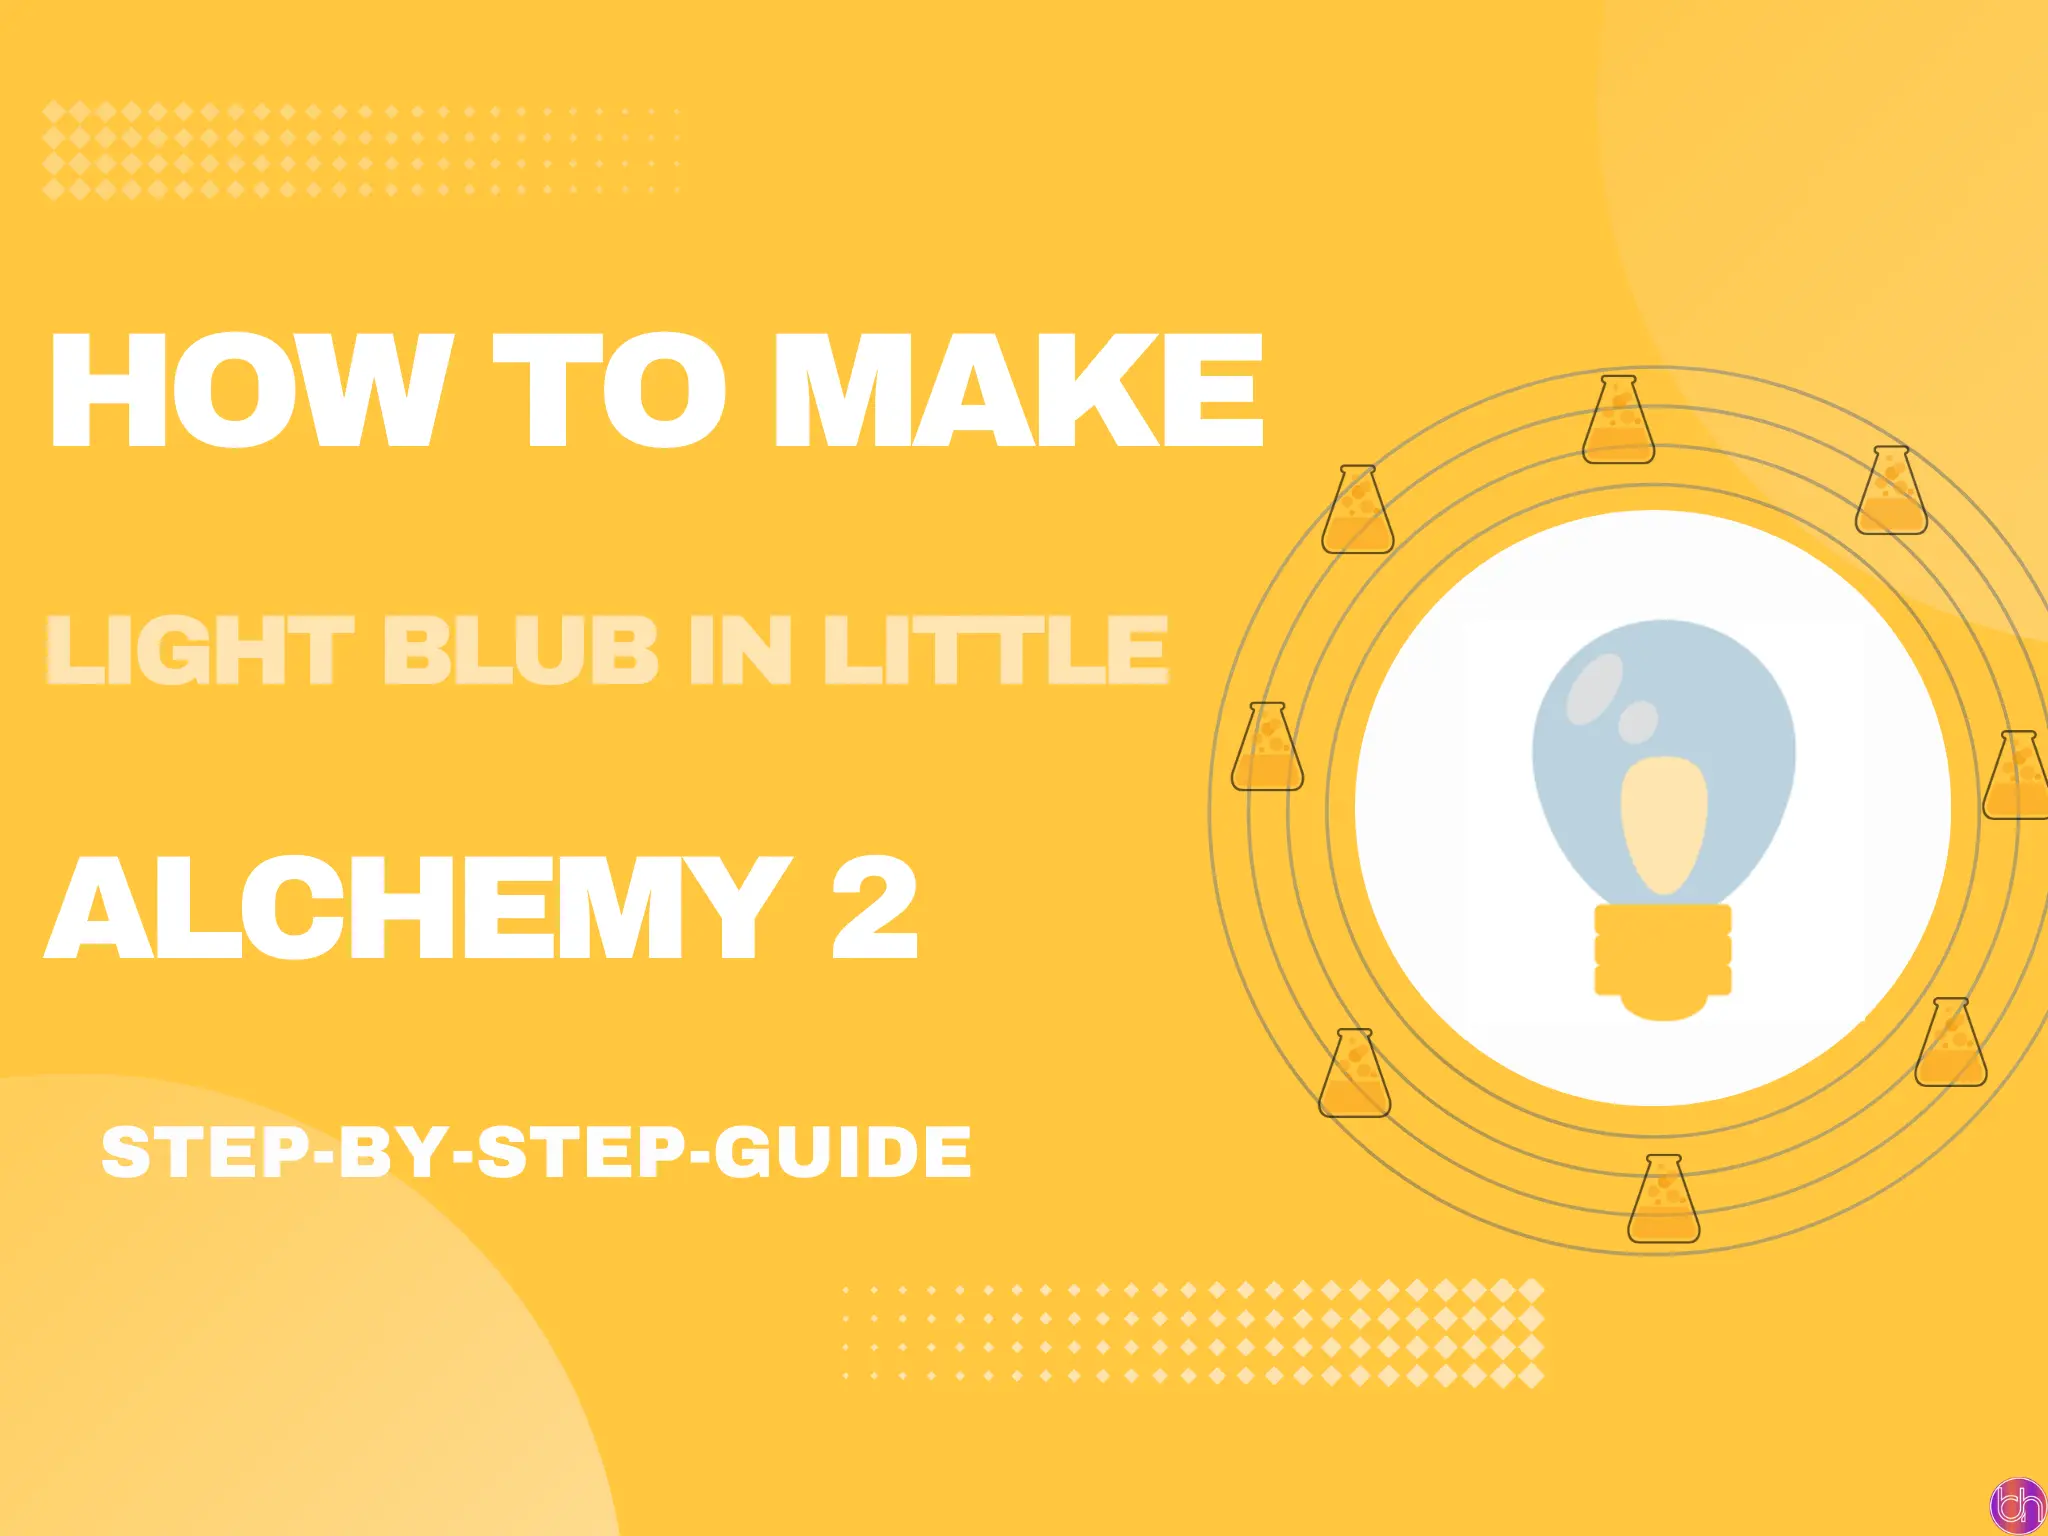 how to make light bulb in little alchemy 2